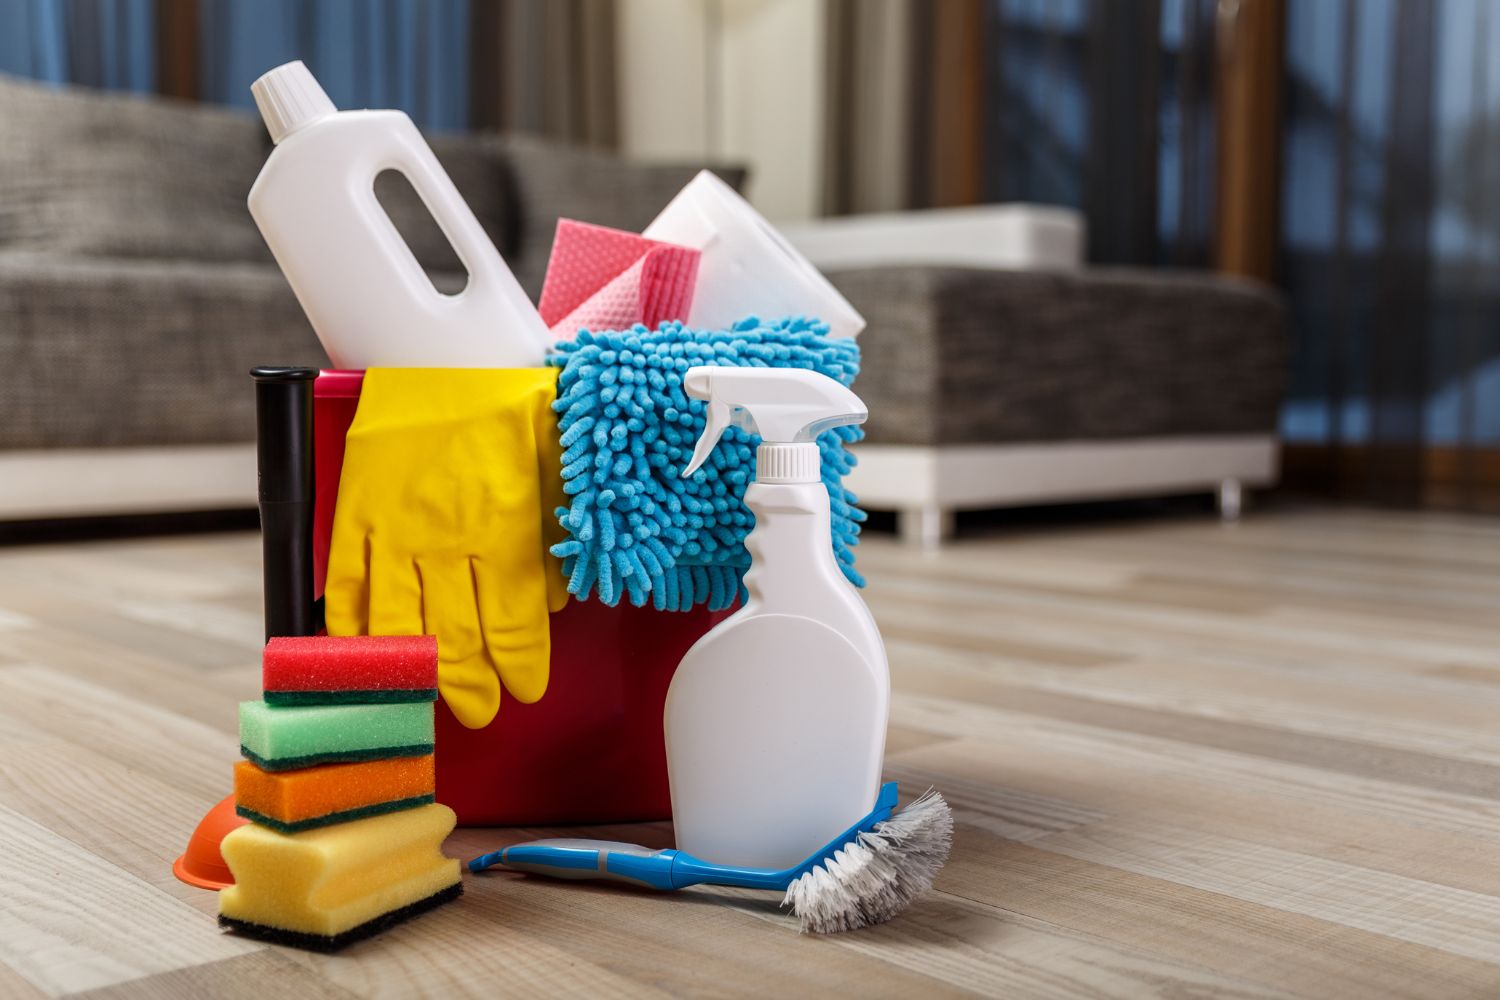 Cheap Cleaning Services Singapore: Access advanced cleaning methods